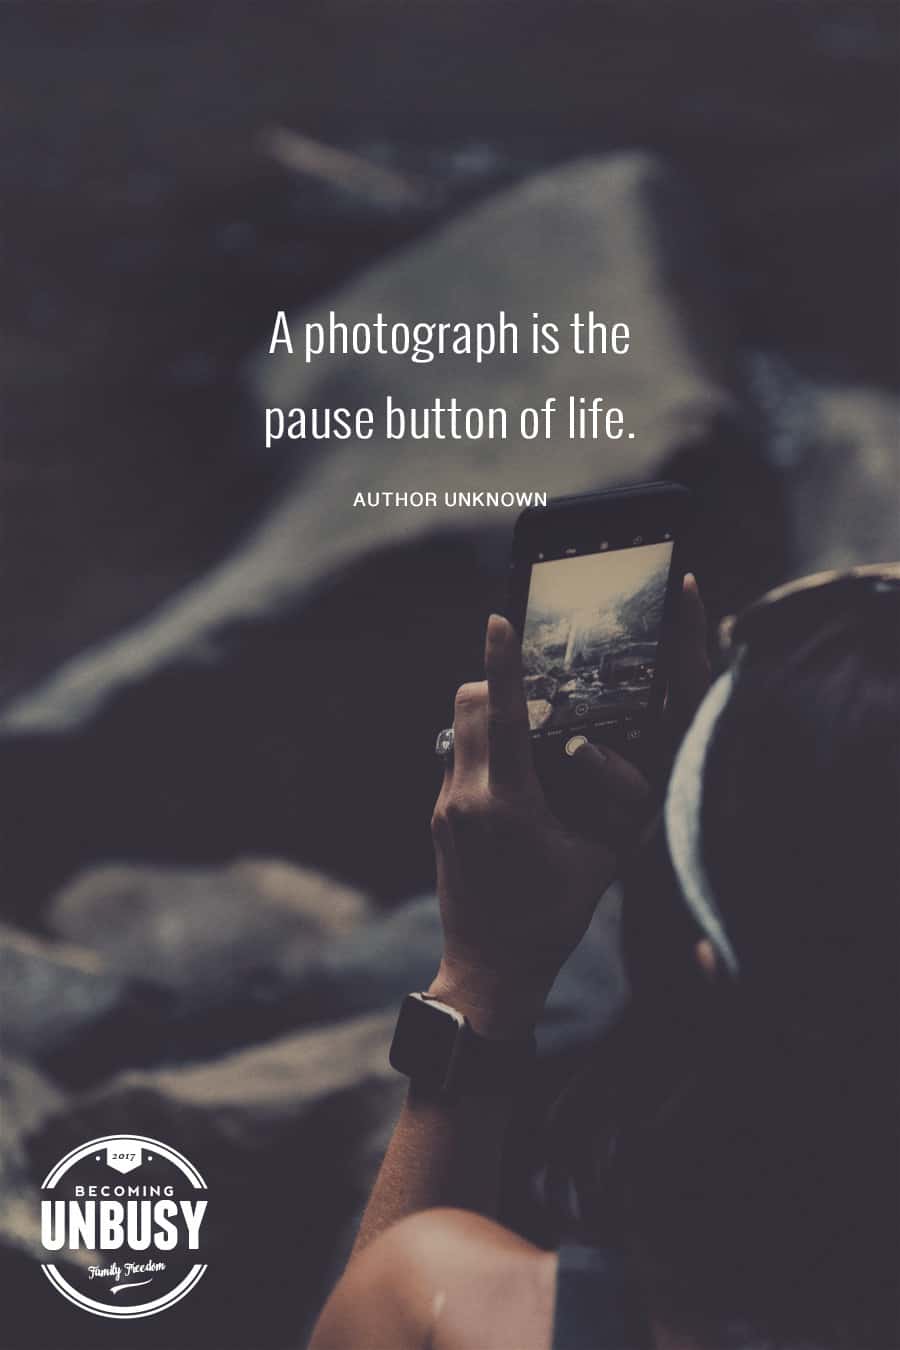 A photography is the pause button of life. #photography #quote #intentionalliving #becomingunbusy *Loving this post about how to slow down time. So good.